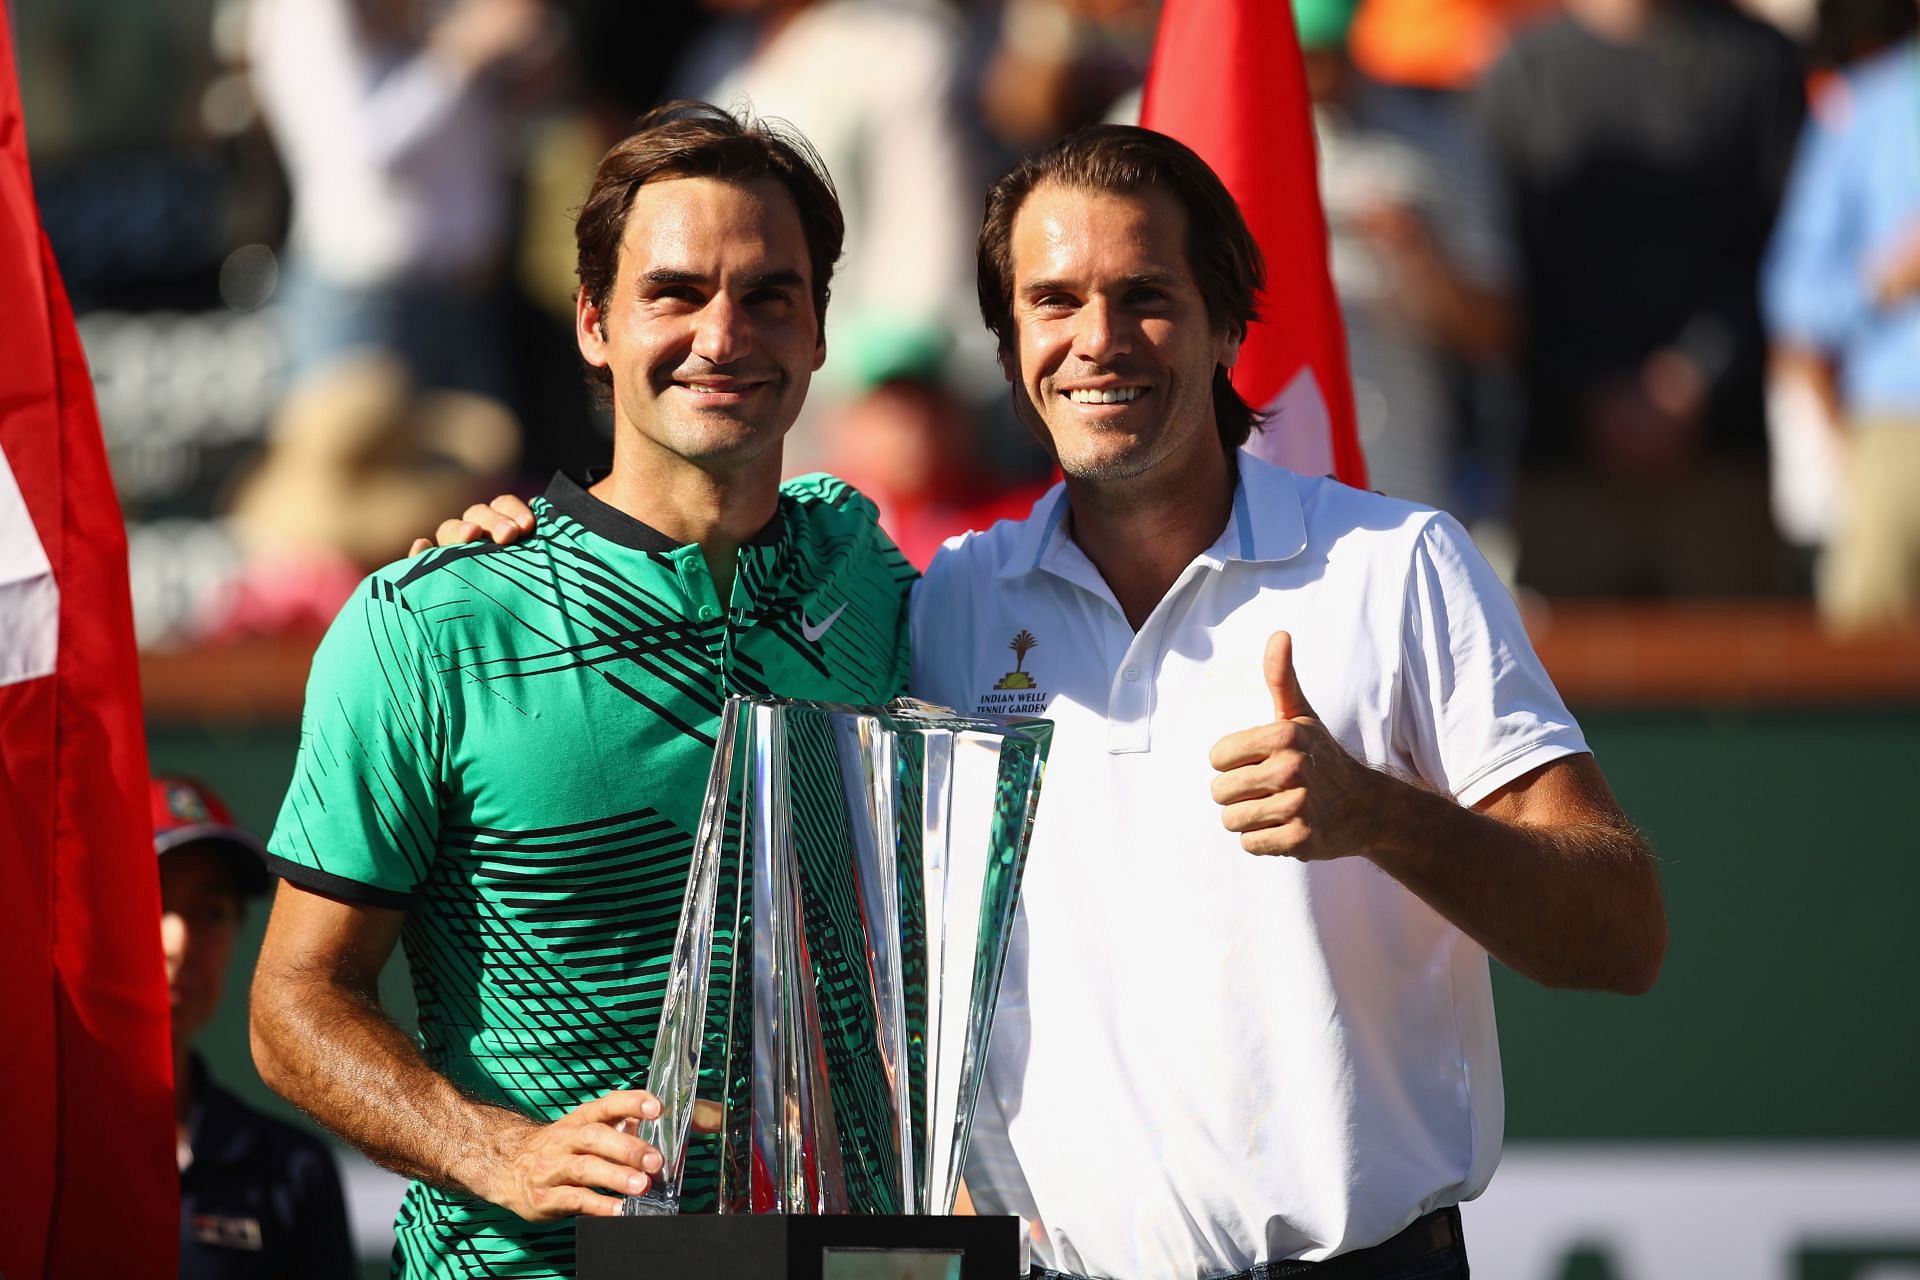 Federer and Haas at the BNP Paribas Open